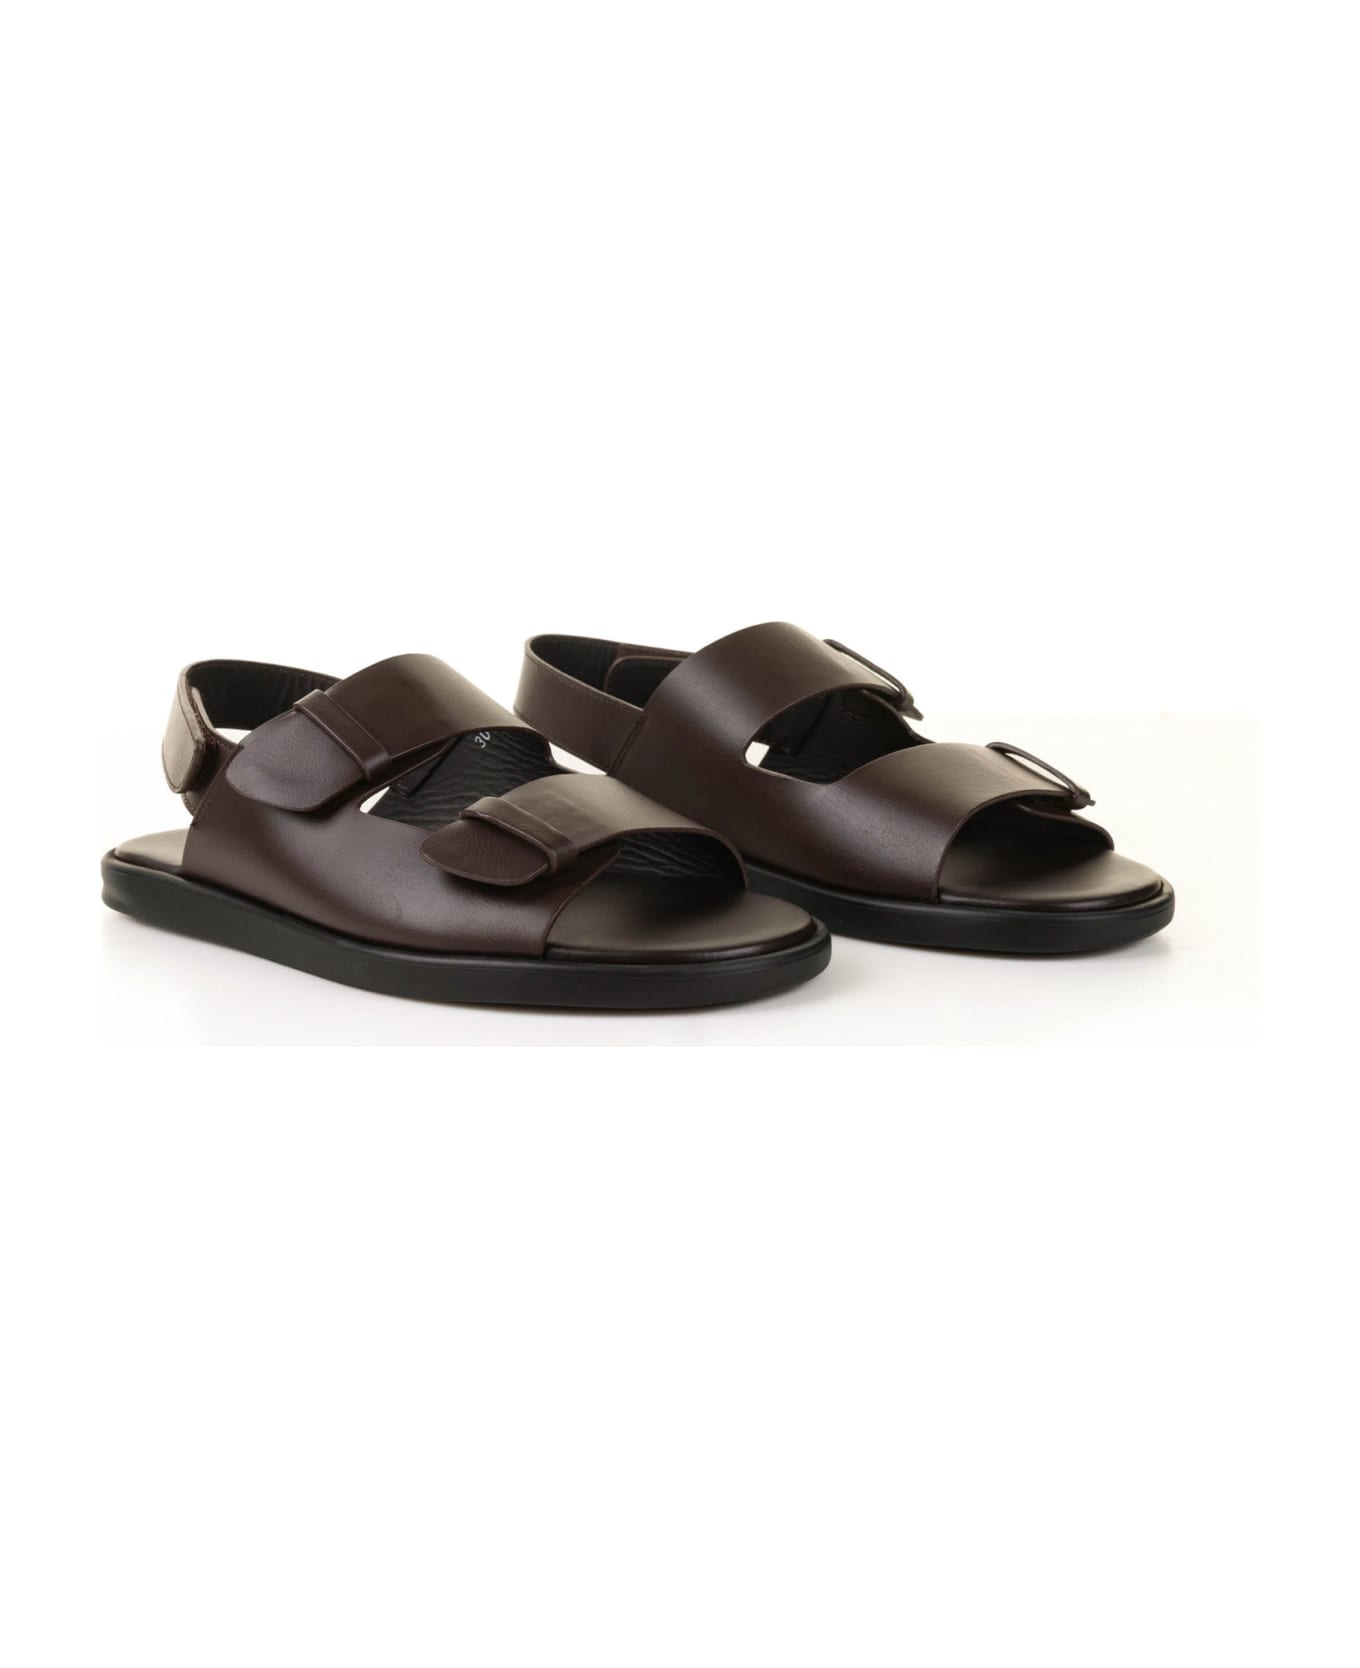 Doucal's Sandal In Dark Brown Leather And Rubber Sole - T MORO